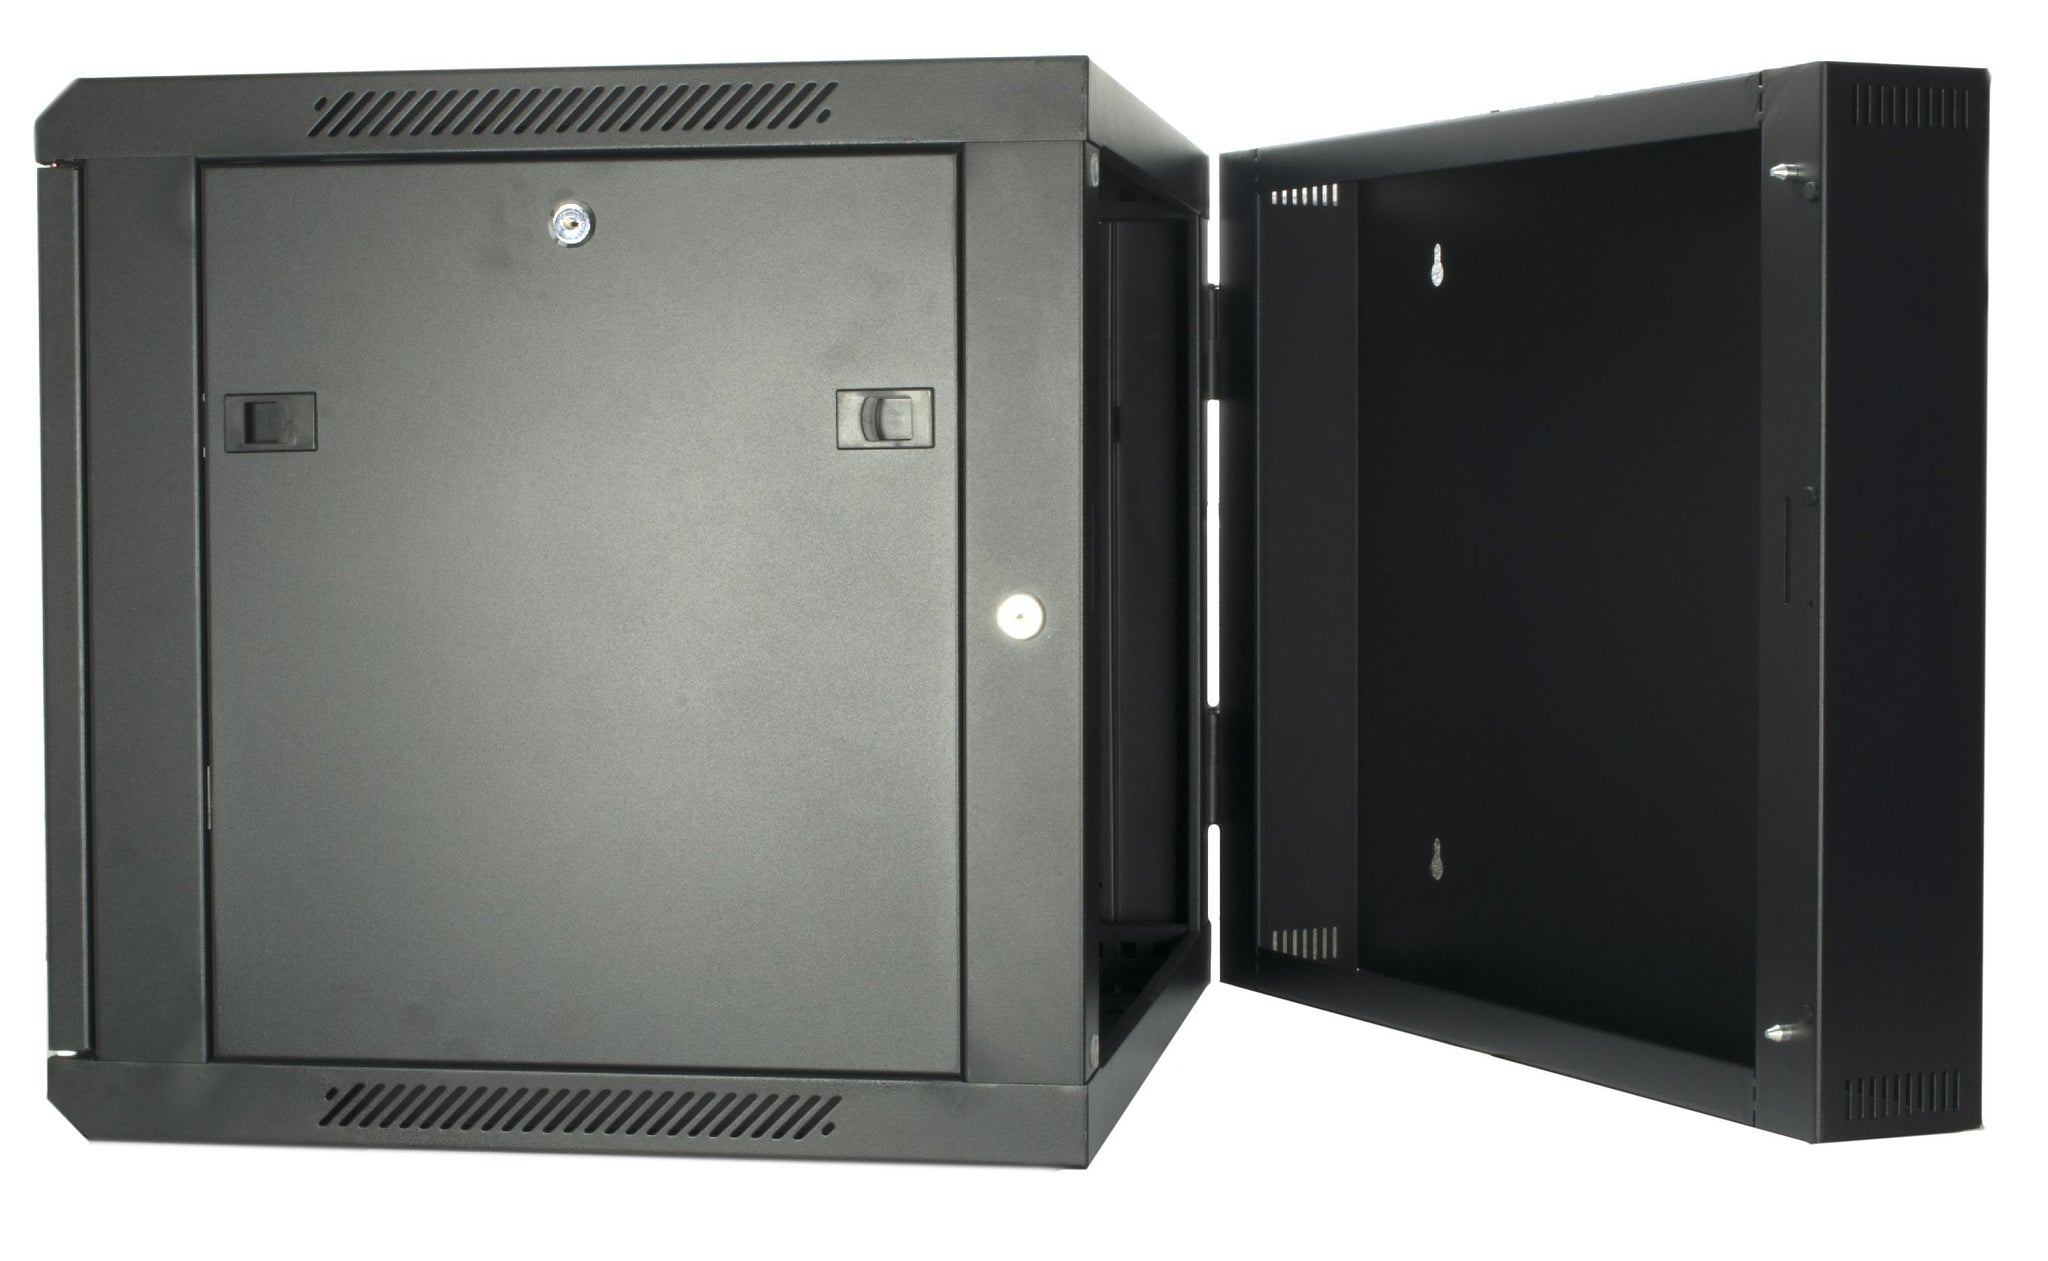 18U 550mm Double Sectioned Data Wall Comms Cabinet (450+100mm) - Black